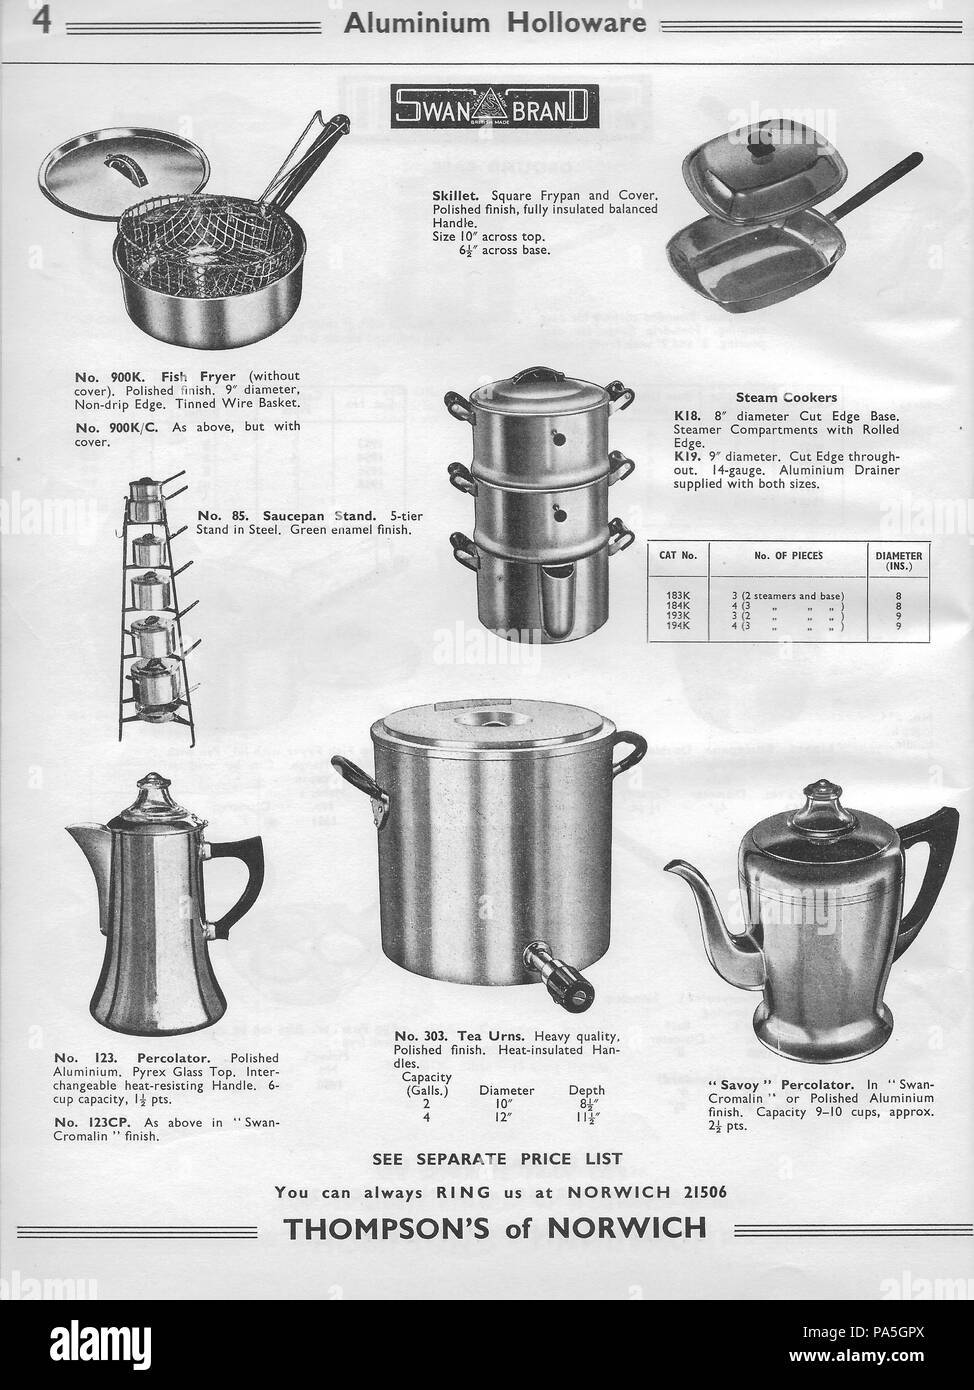 https://c8.alamy.com/comp/PA5GPX/general-wholesale-catalogue-hardware-factors-h-thompson-sons-ltd-chalk-hill-works-norwich-england-uk-1940s-1950s-retro-vintage-household-products-items-illustrated-pictures-drawings-illustrations-monochrome-black-and-white-PA5GPX.jpg